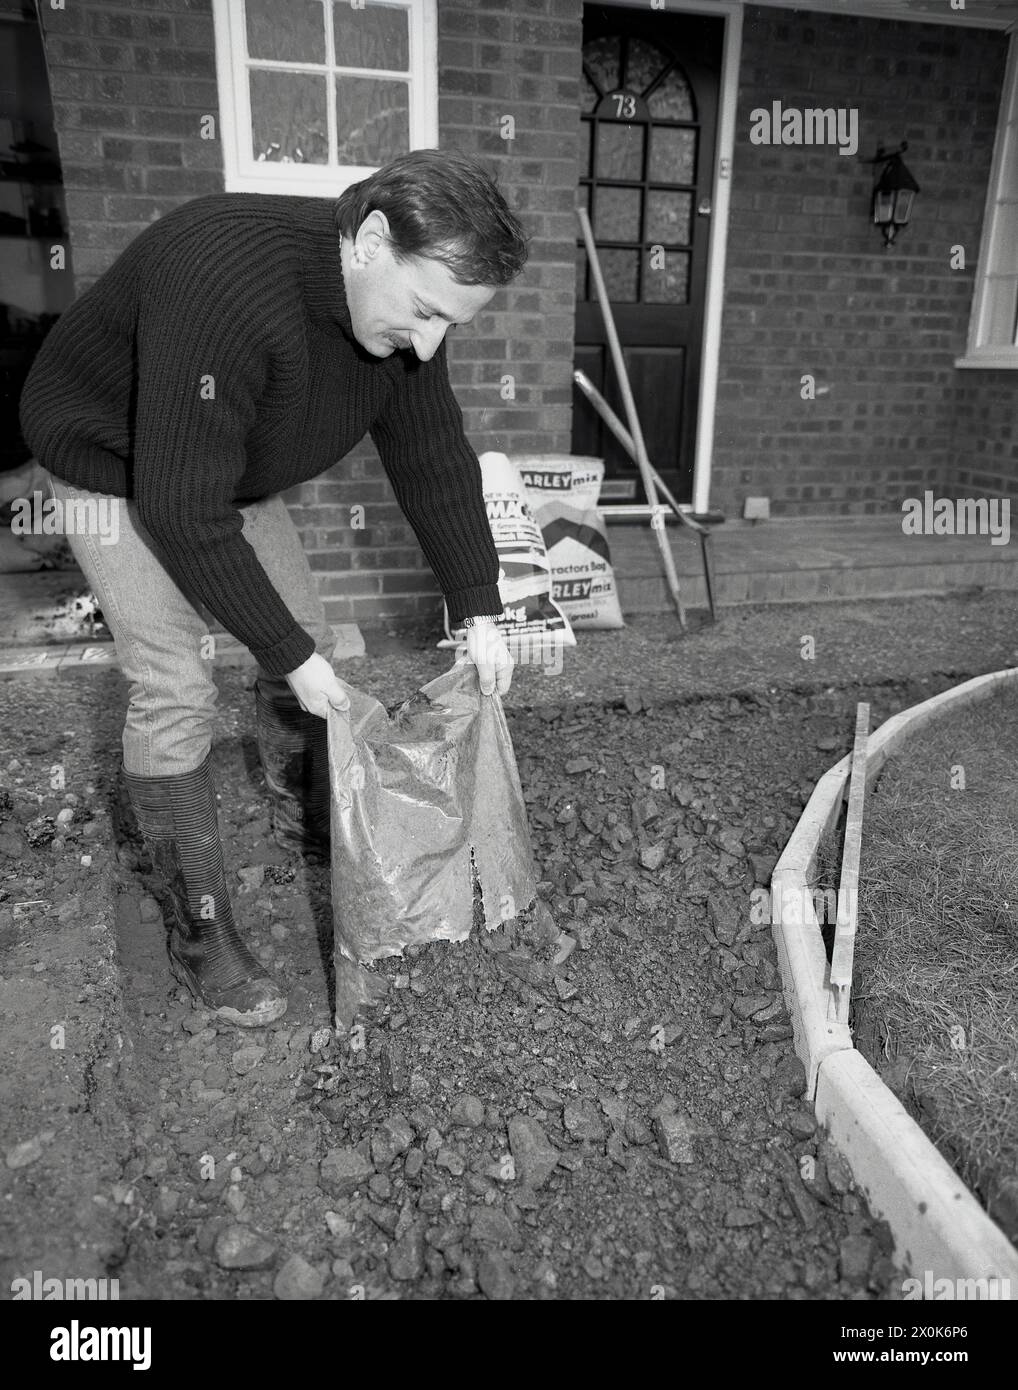 1980s, a man building a new driveway outside a house, putting down hard core rubble as a base. Hardcore is an essential material to lay strong foundations for any building works. Stock Photo